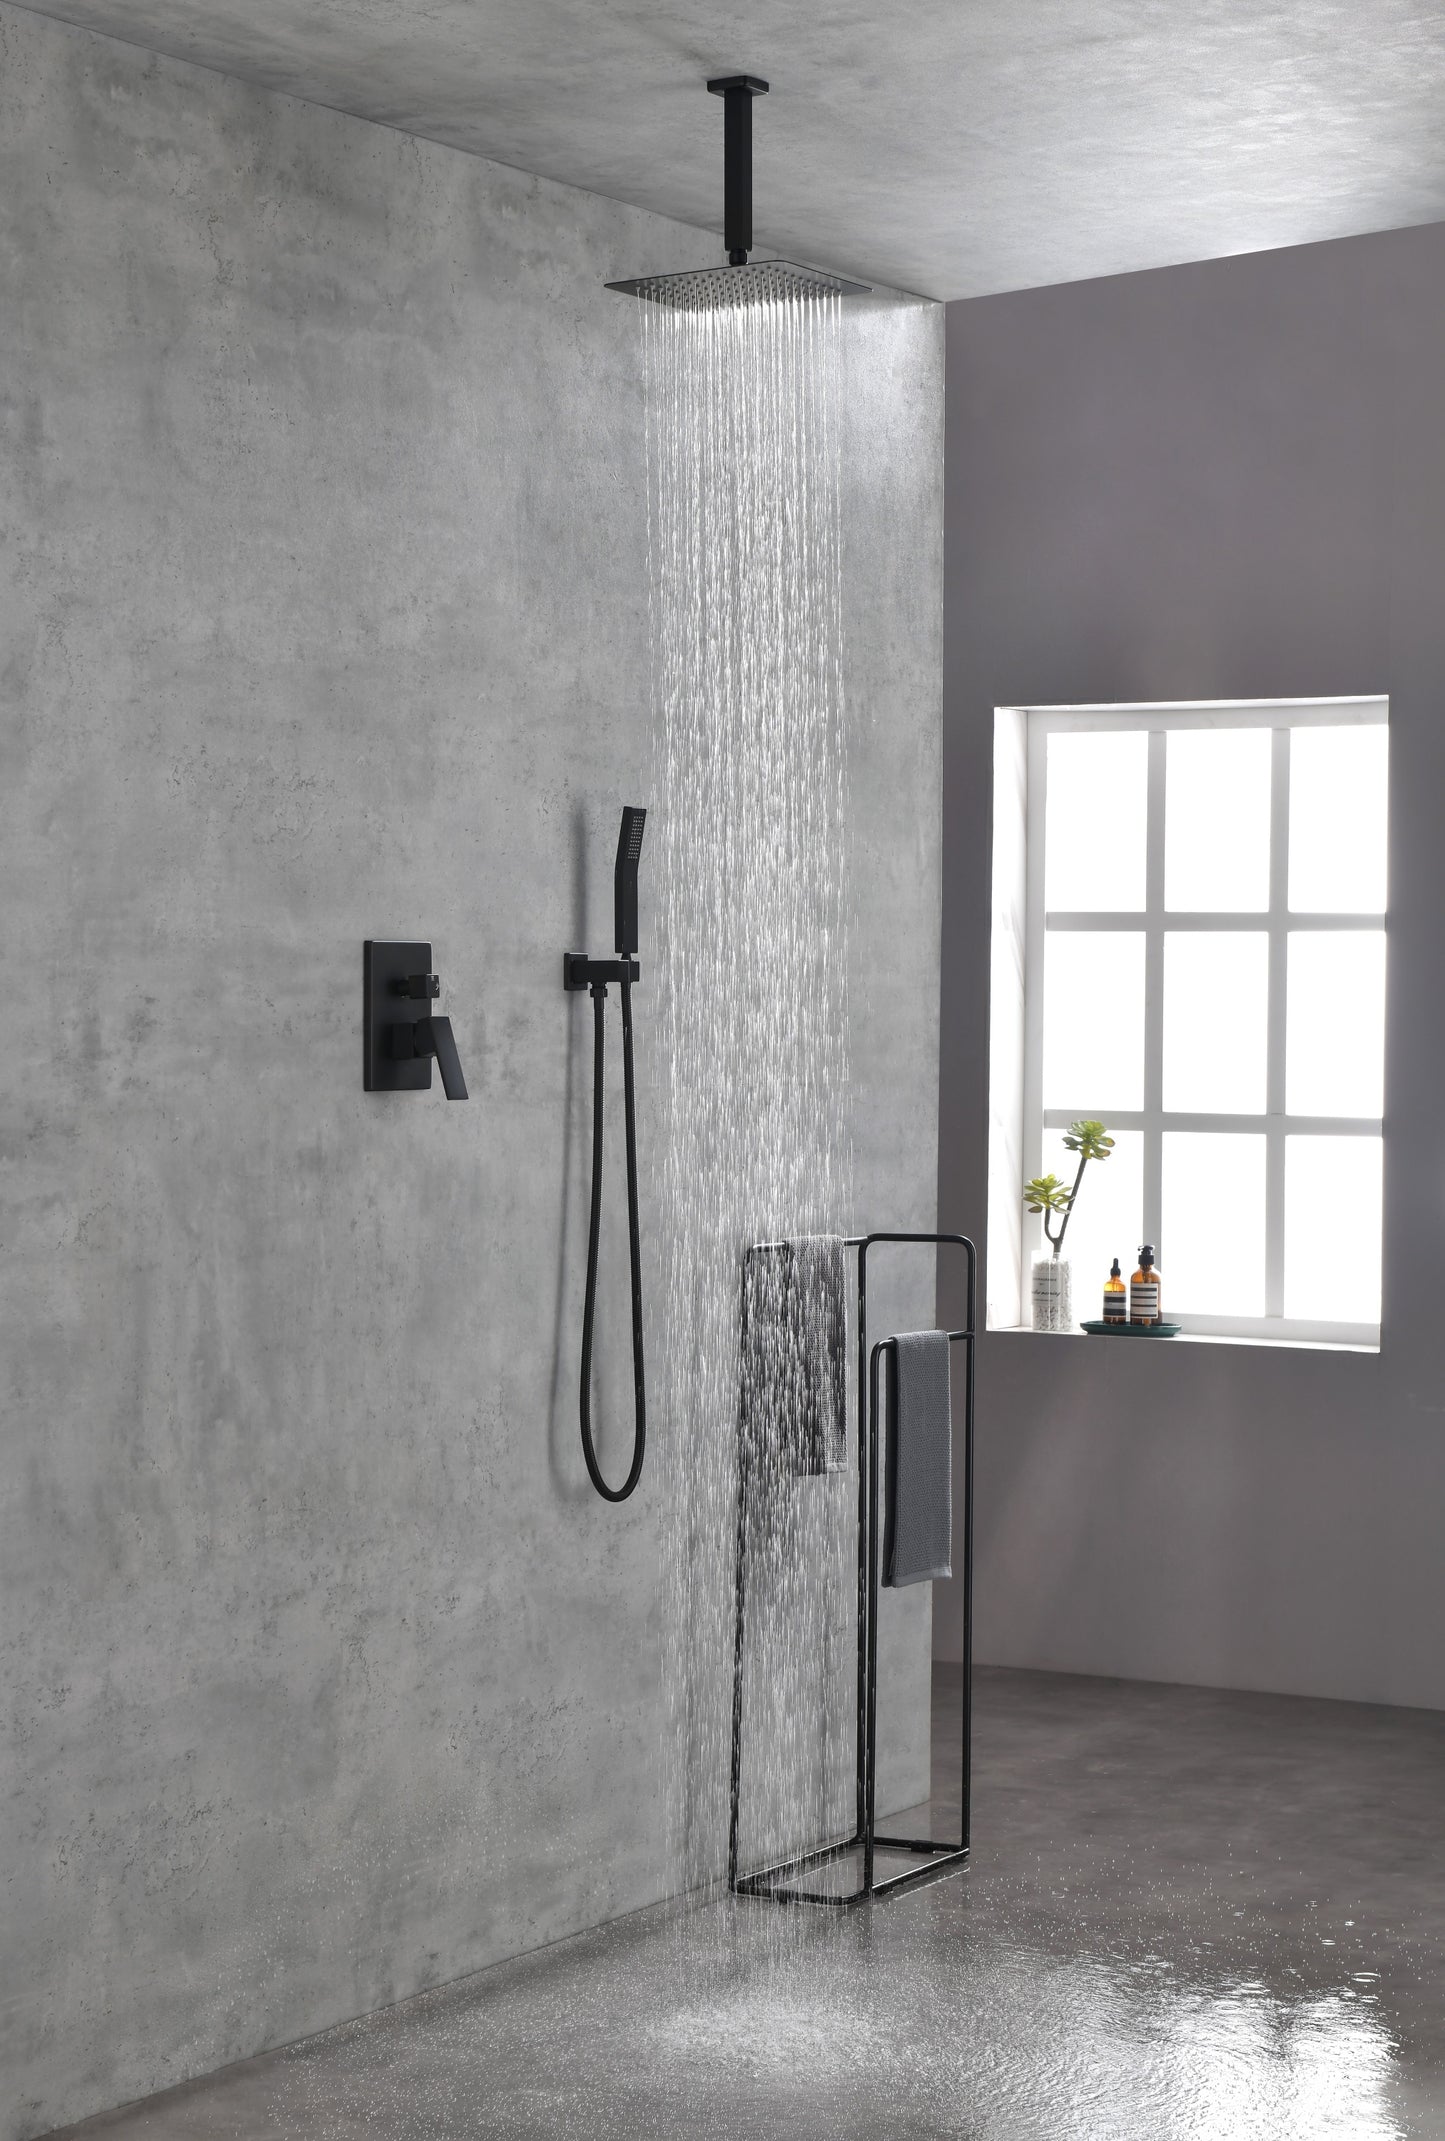 Ceiling Mounted Shower System Combo Set with Handheld and 12"Shower head